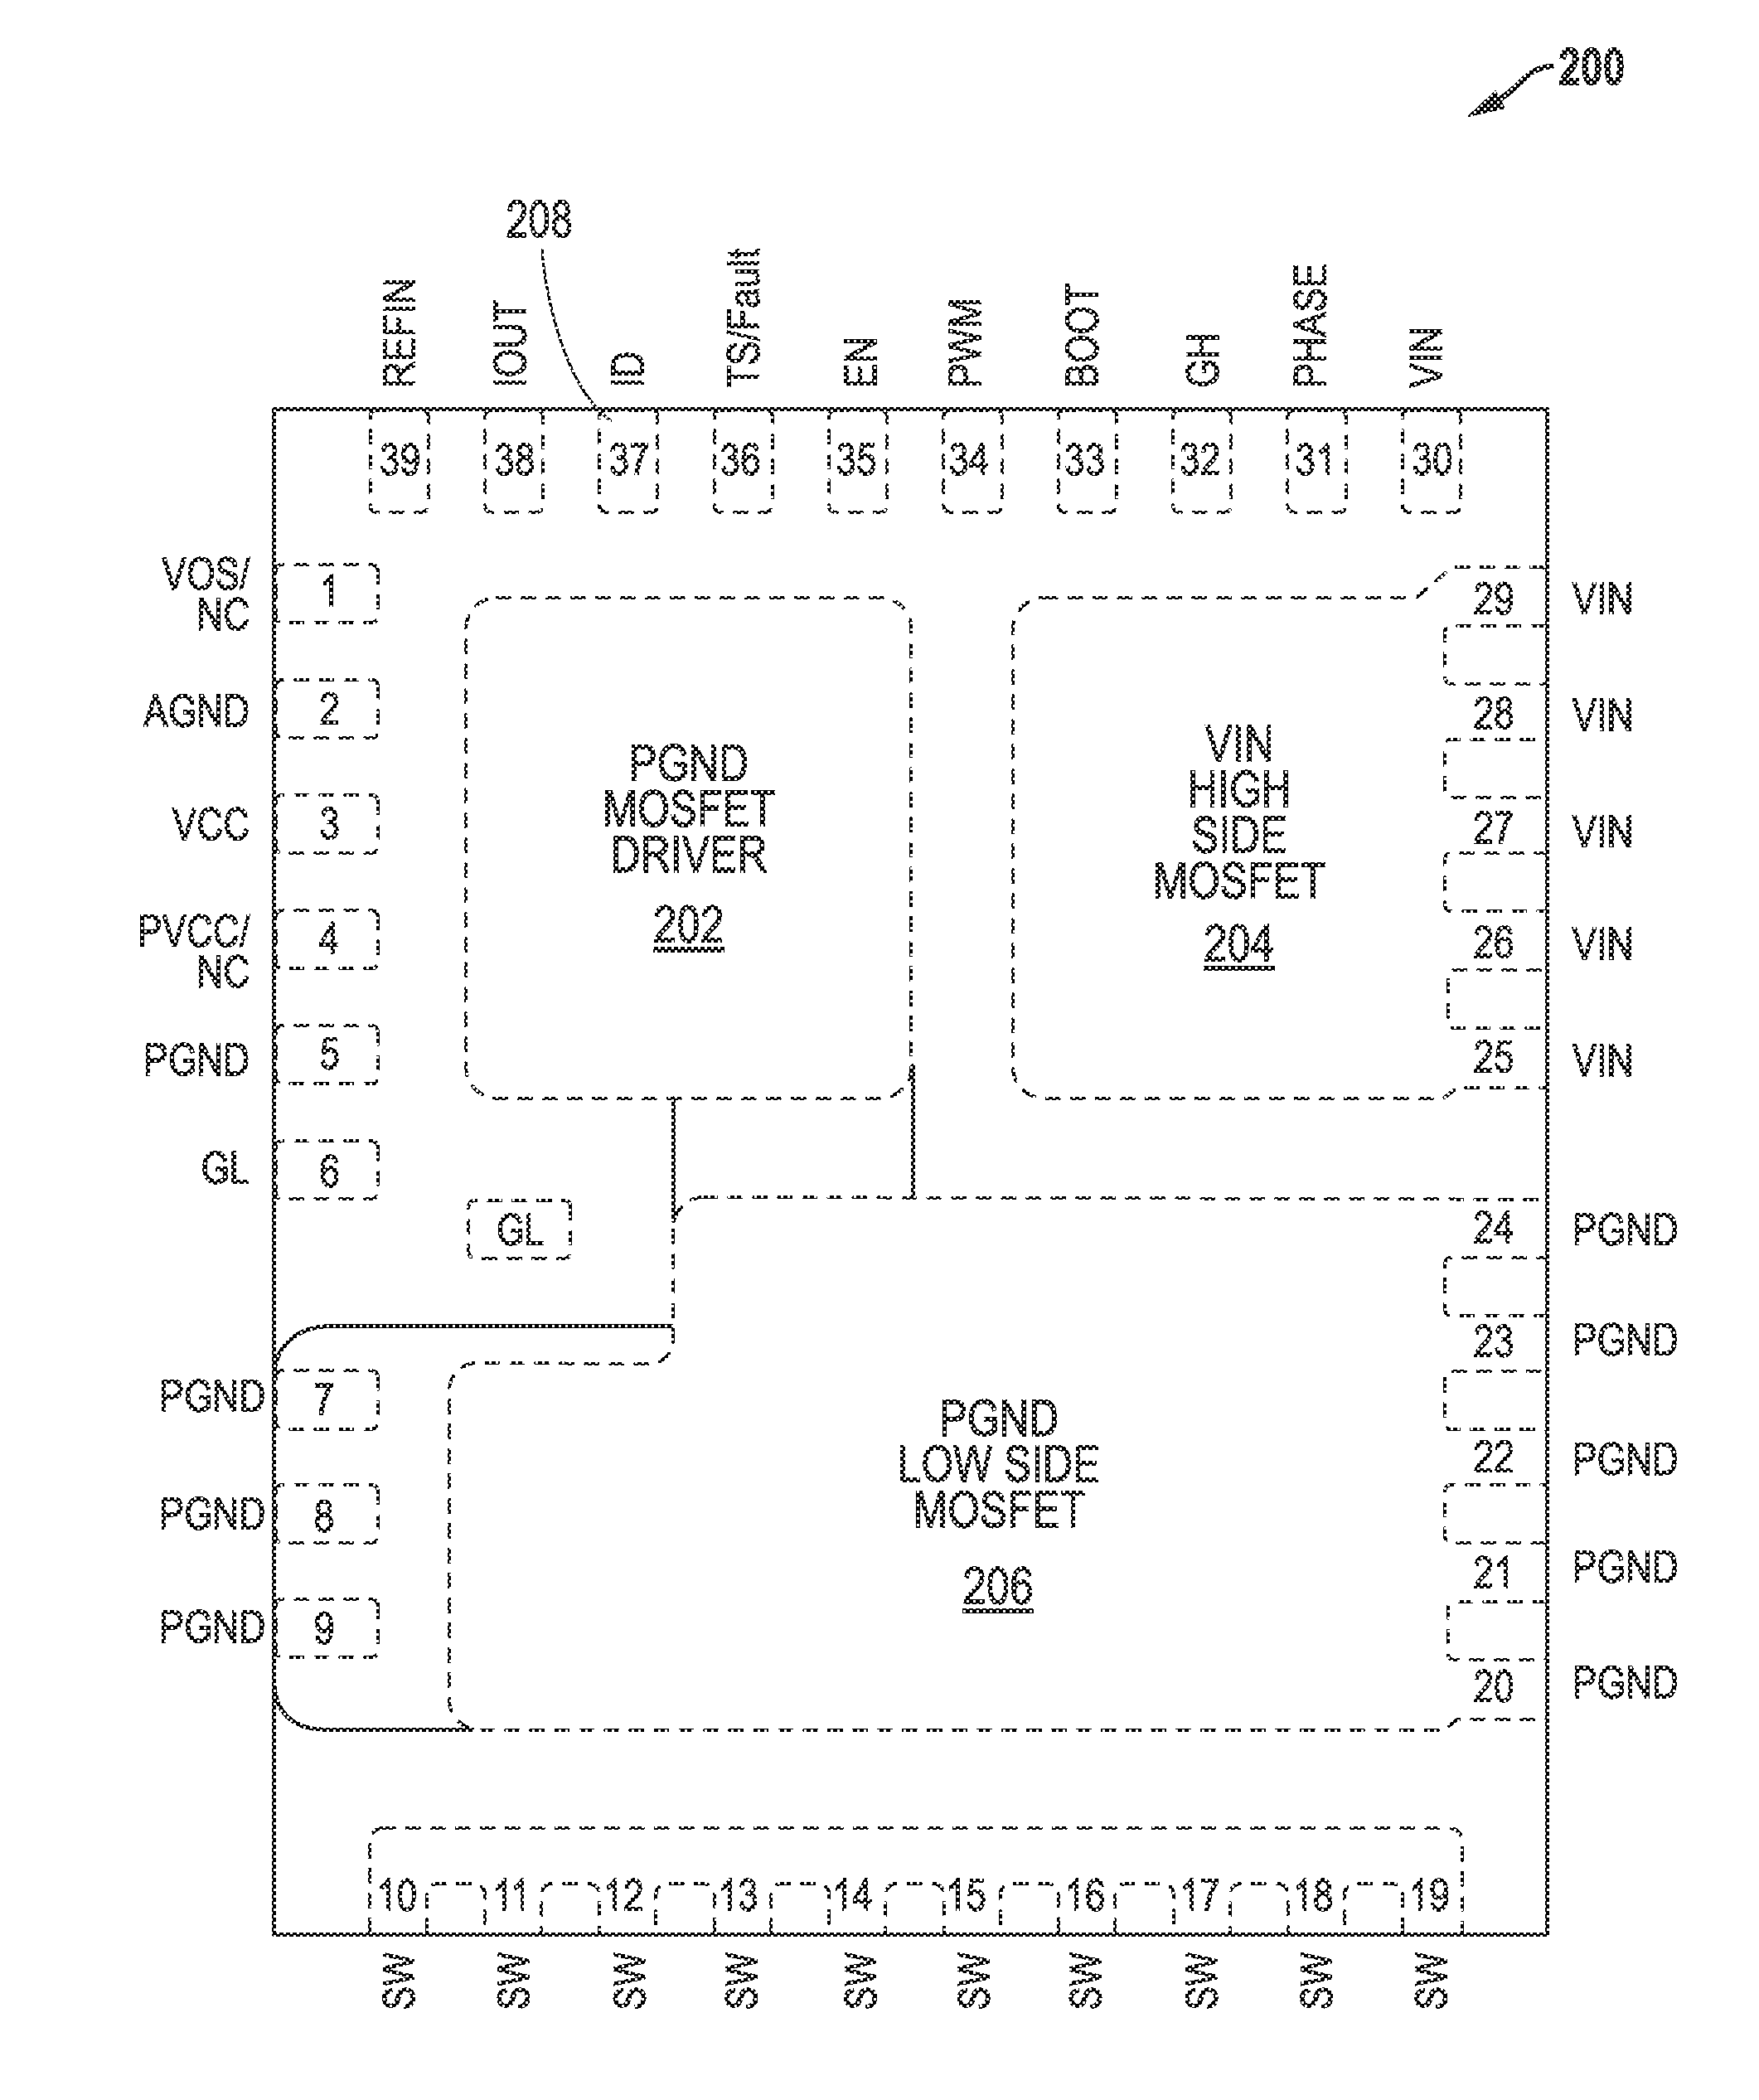 Methods and systems for improving light load efficiency for power stages of multi-phase voltage regulator circuits